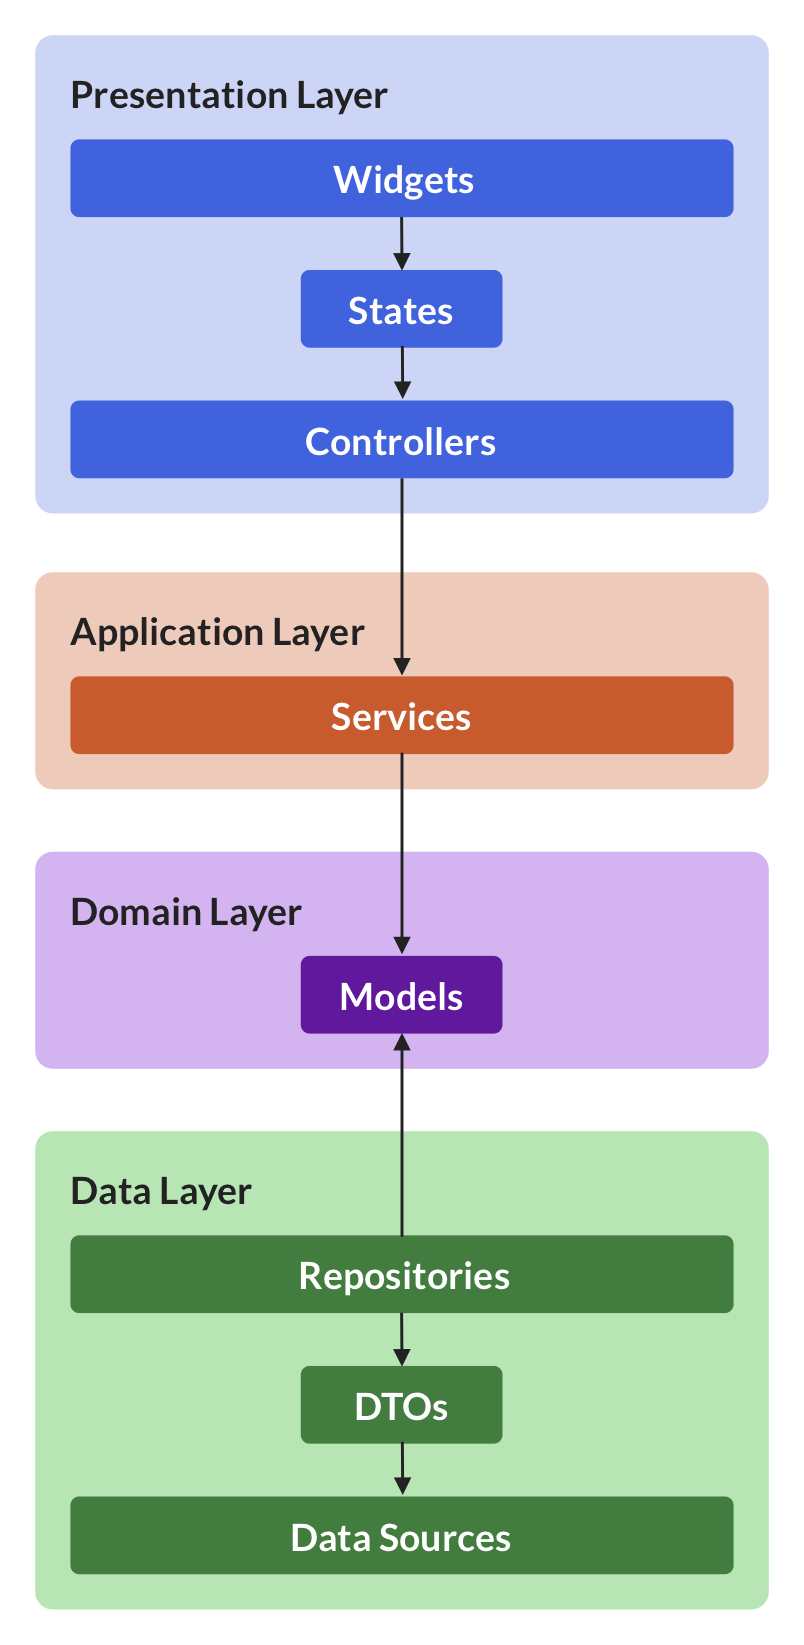 Flutter App Architecture using data, domain, application, and presentation layers. Arrows show the dependencies between layers